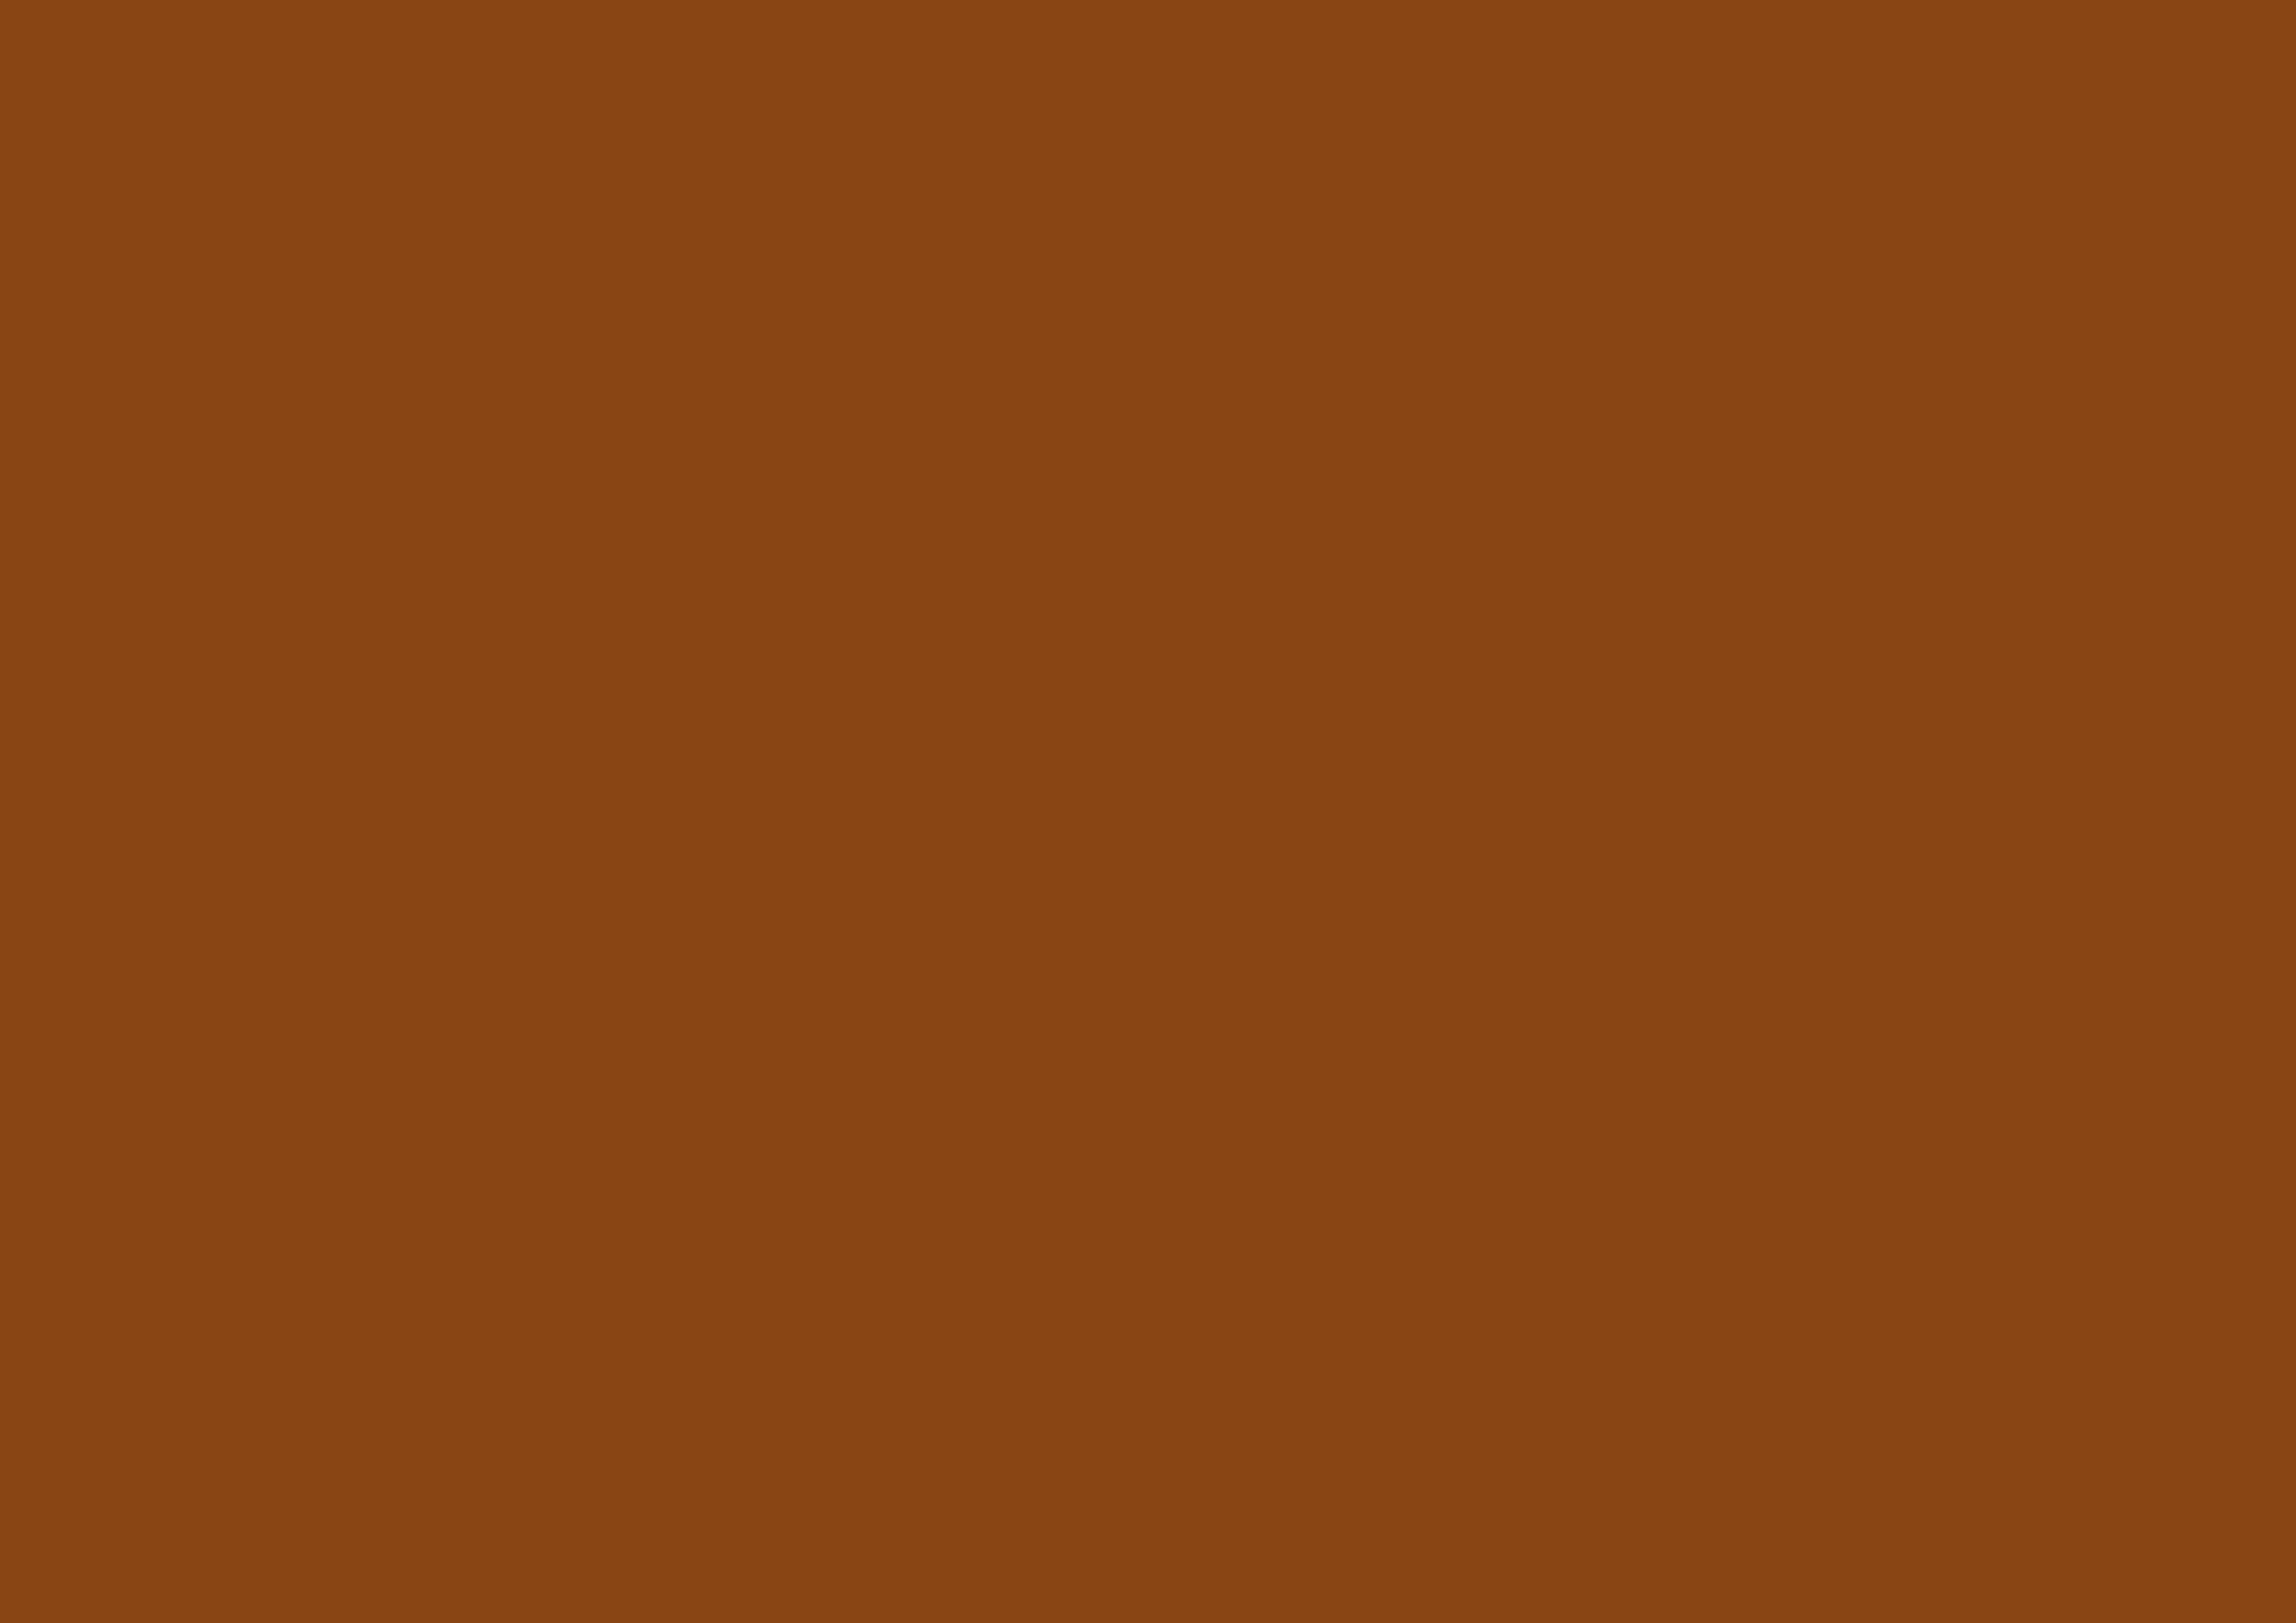 3508x2480 Saddle Brown Solid Color Background